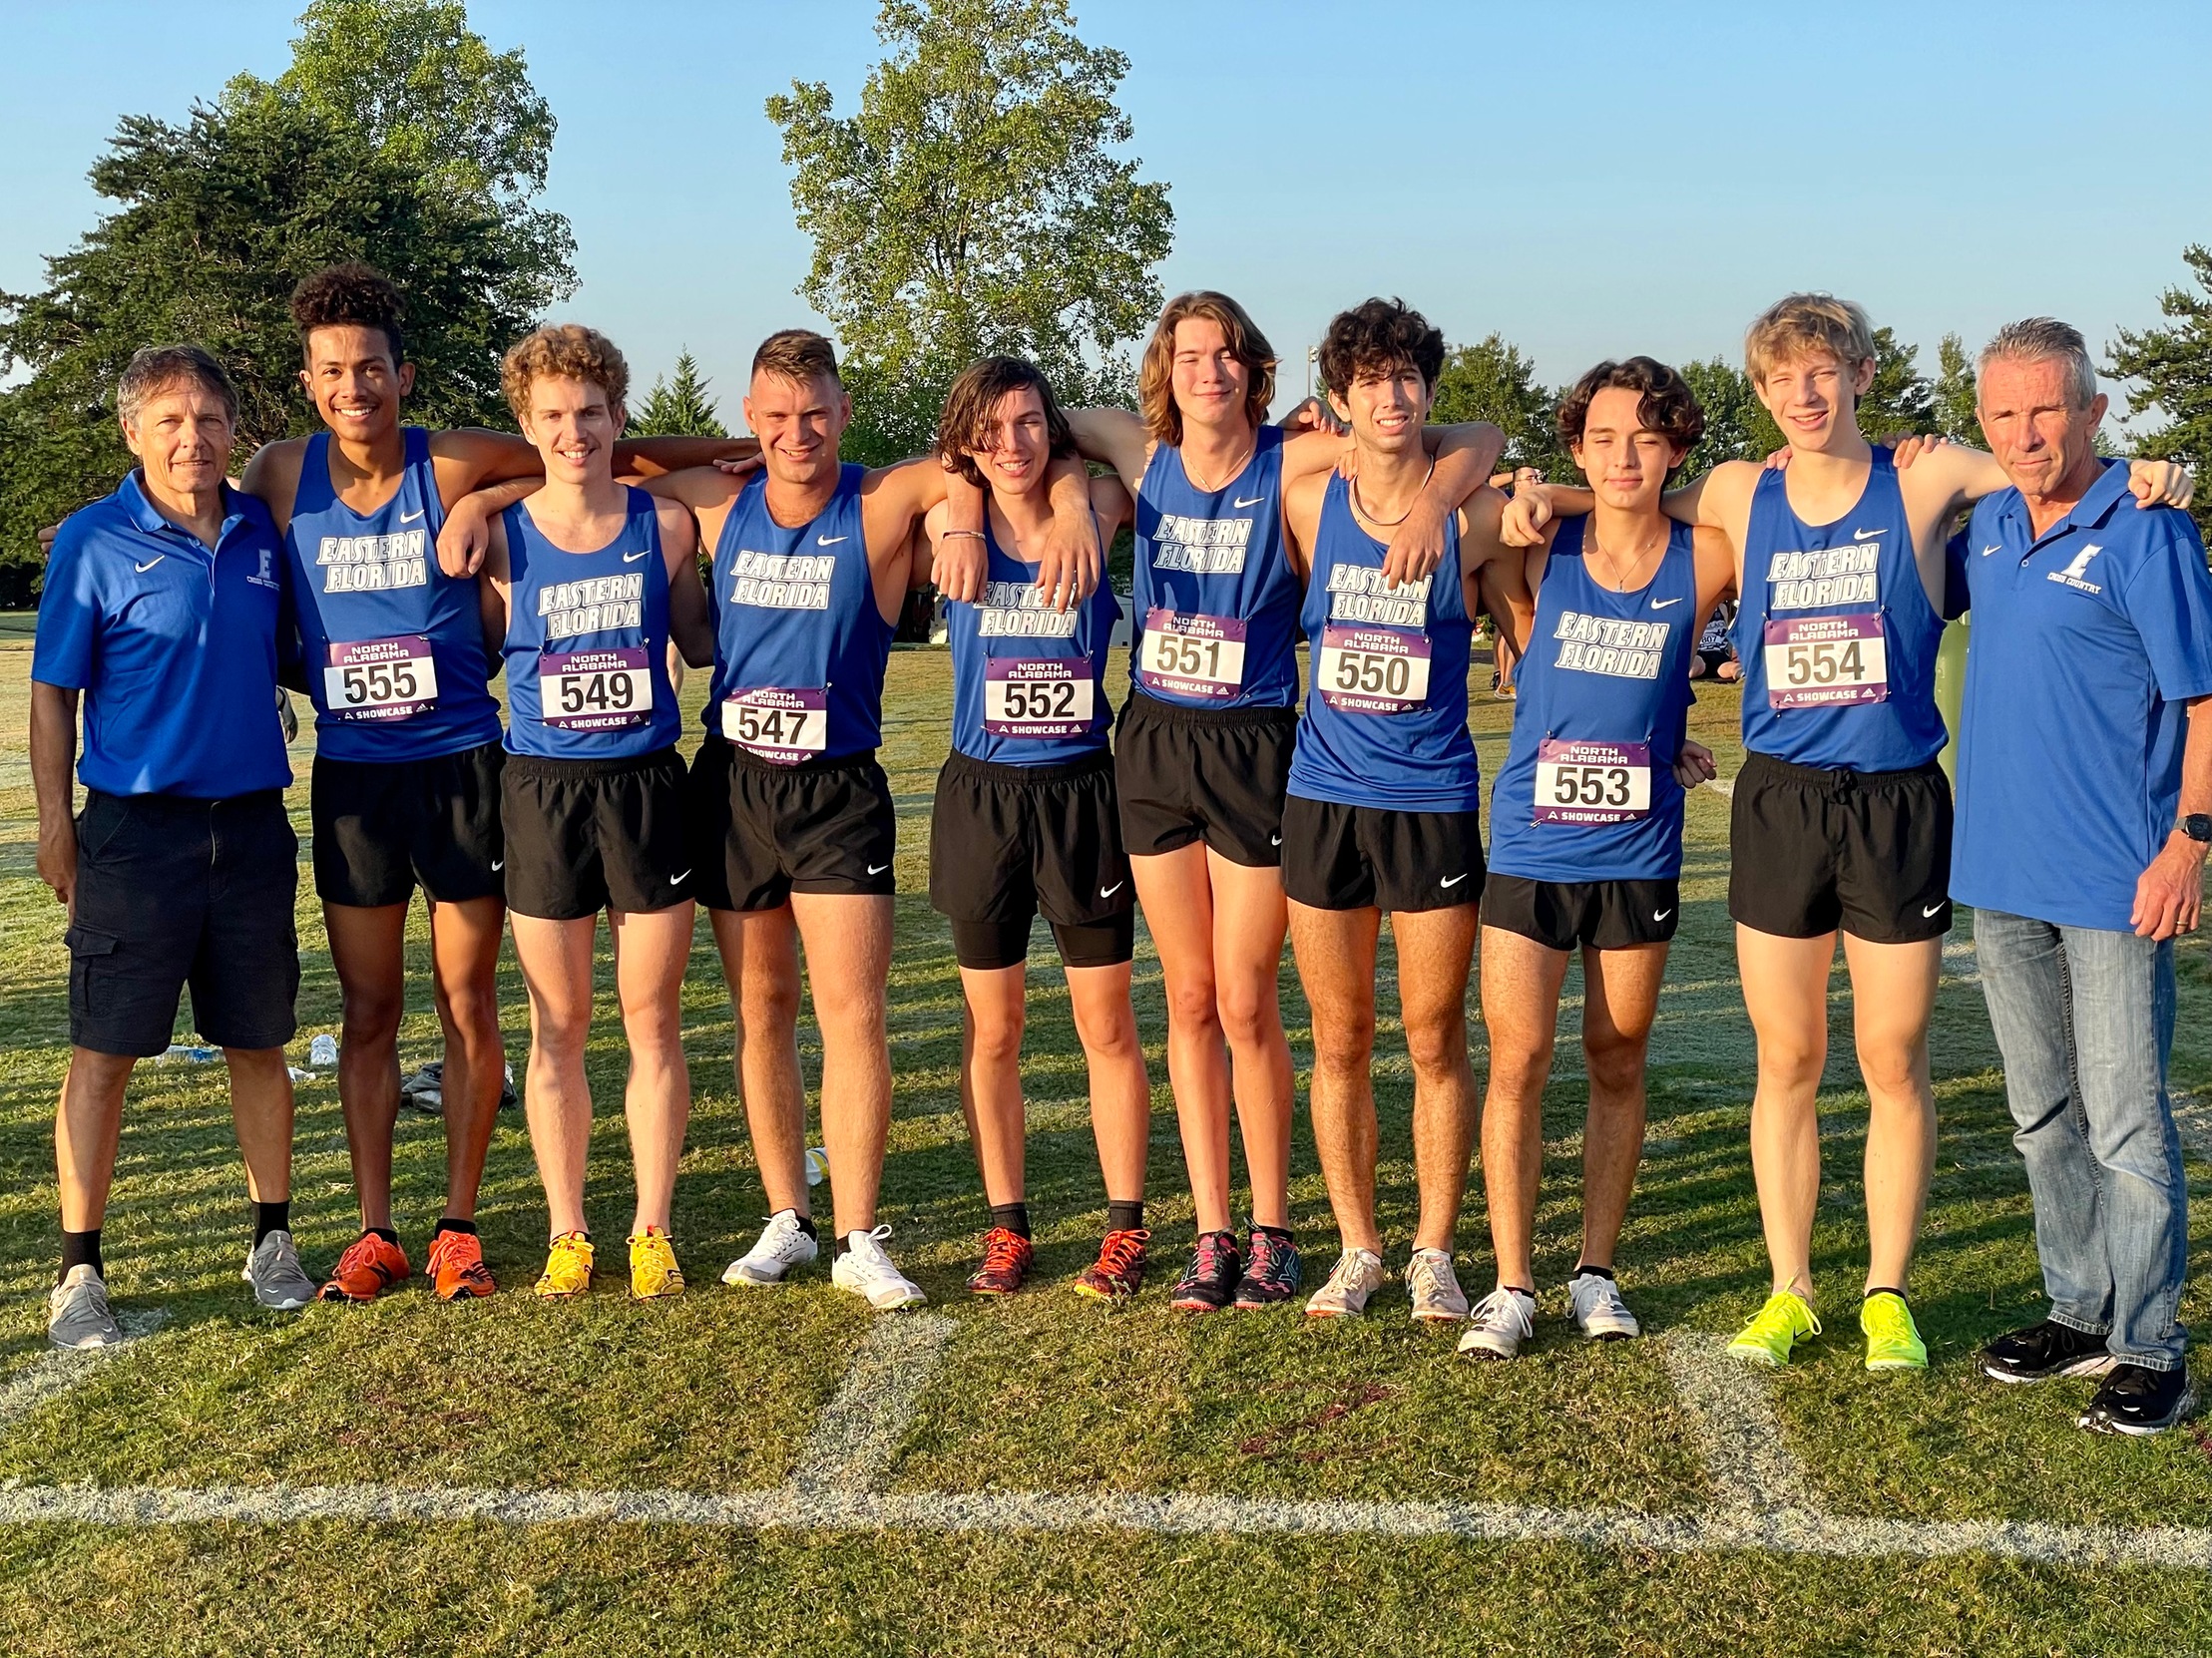 Men's cross country team set to run at National Championships Saturday